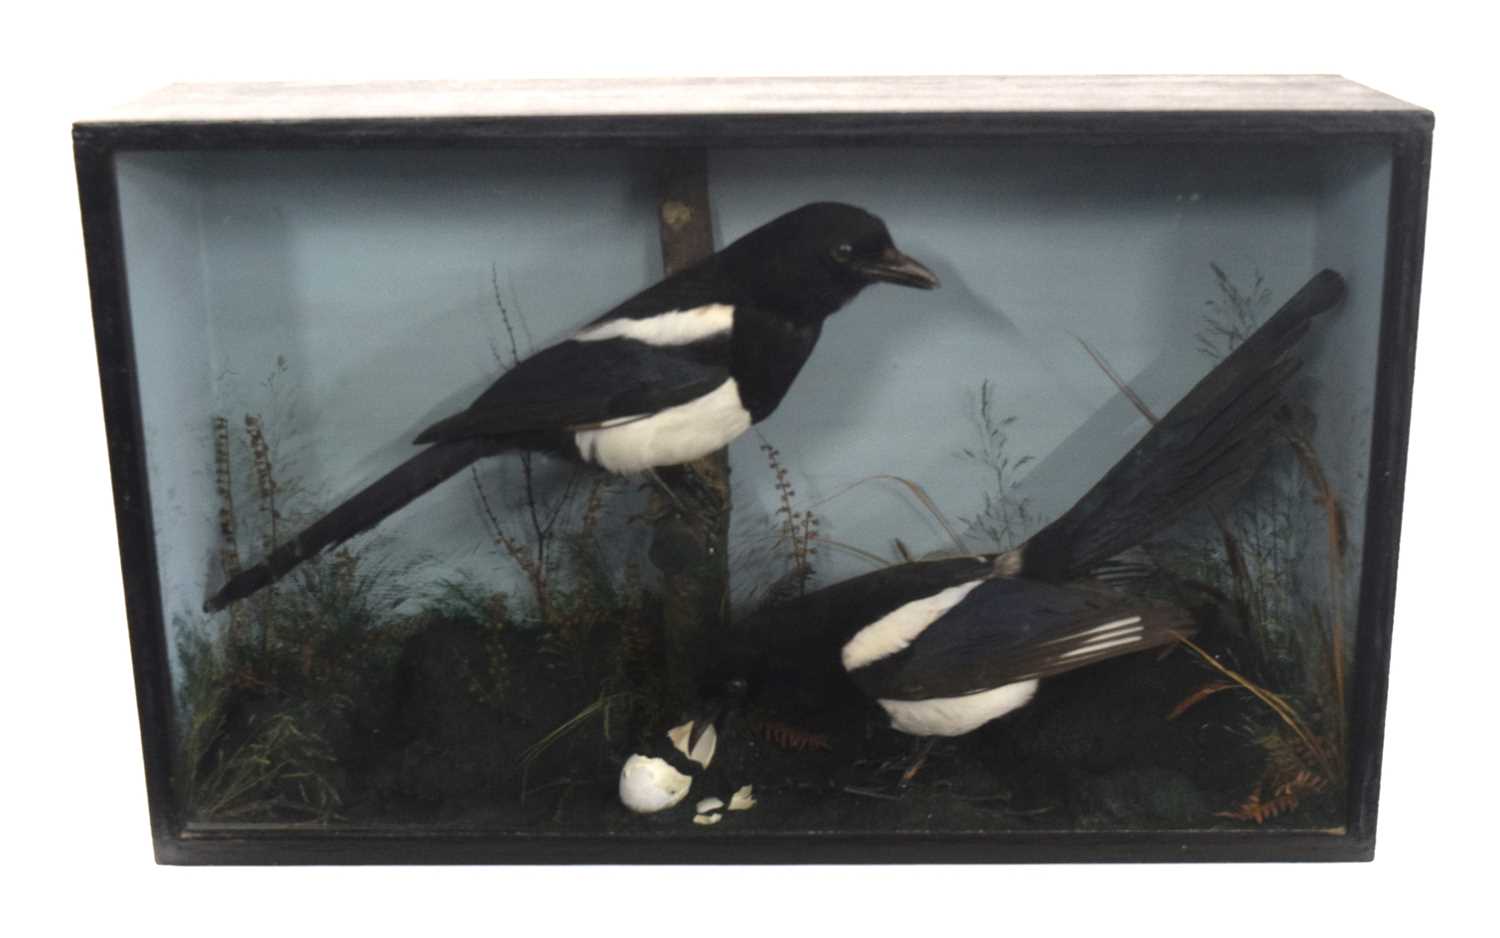 late 20th century taxidermy cased pair of Common Magpies (Pica pica) set in naturalistic setting